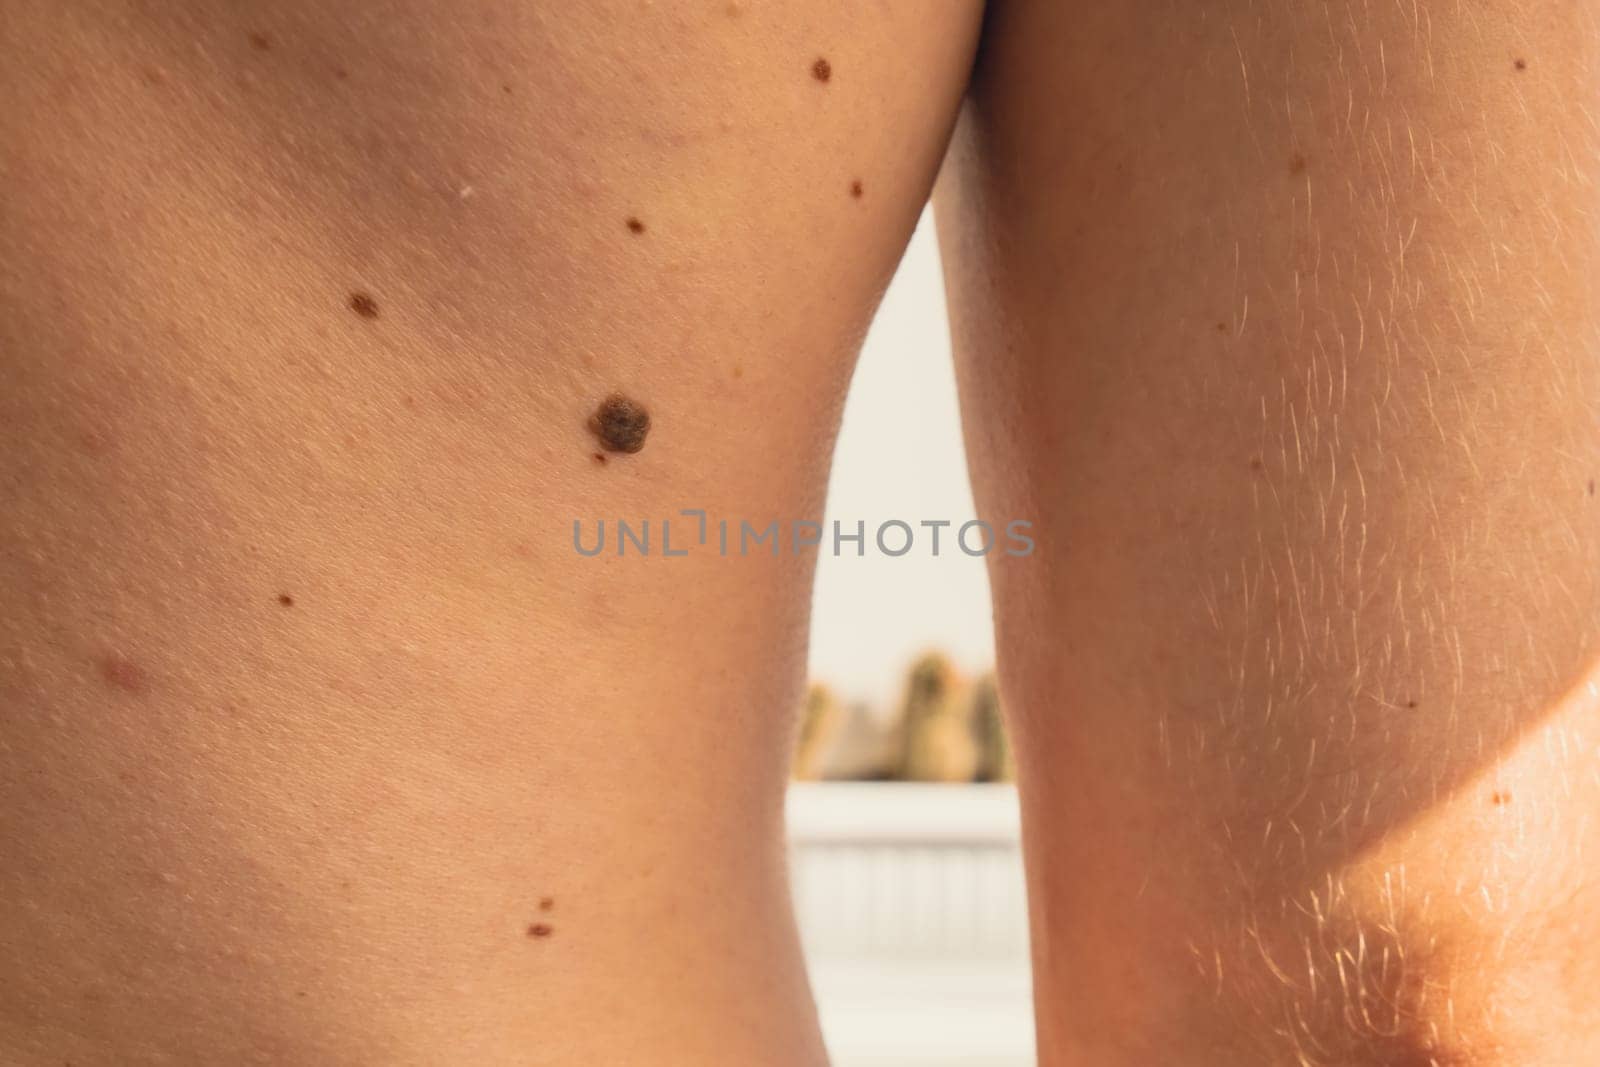 Male showing birthmarks on skin body back part. Close up detail of the bare skin. Health Effects of UV Radiation. Man with birthmarks Pigmentation by anna_stasiia